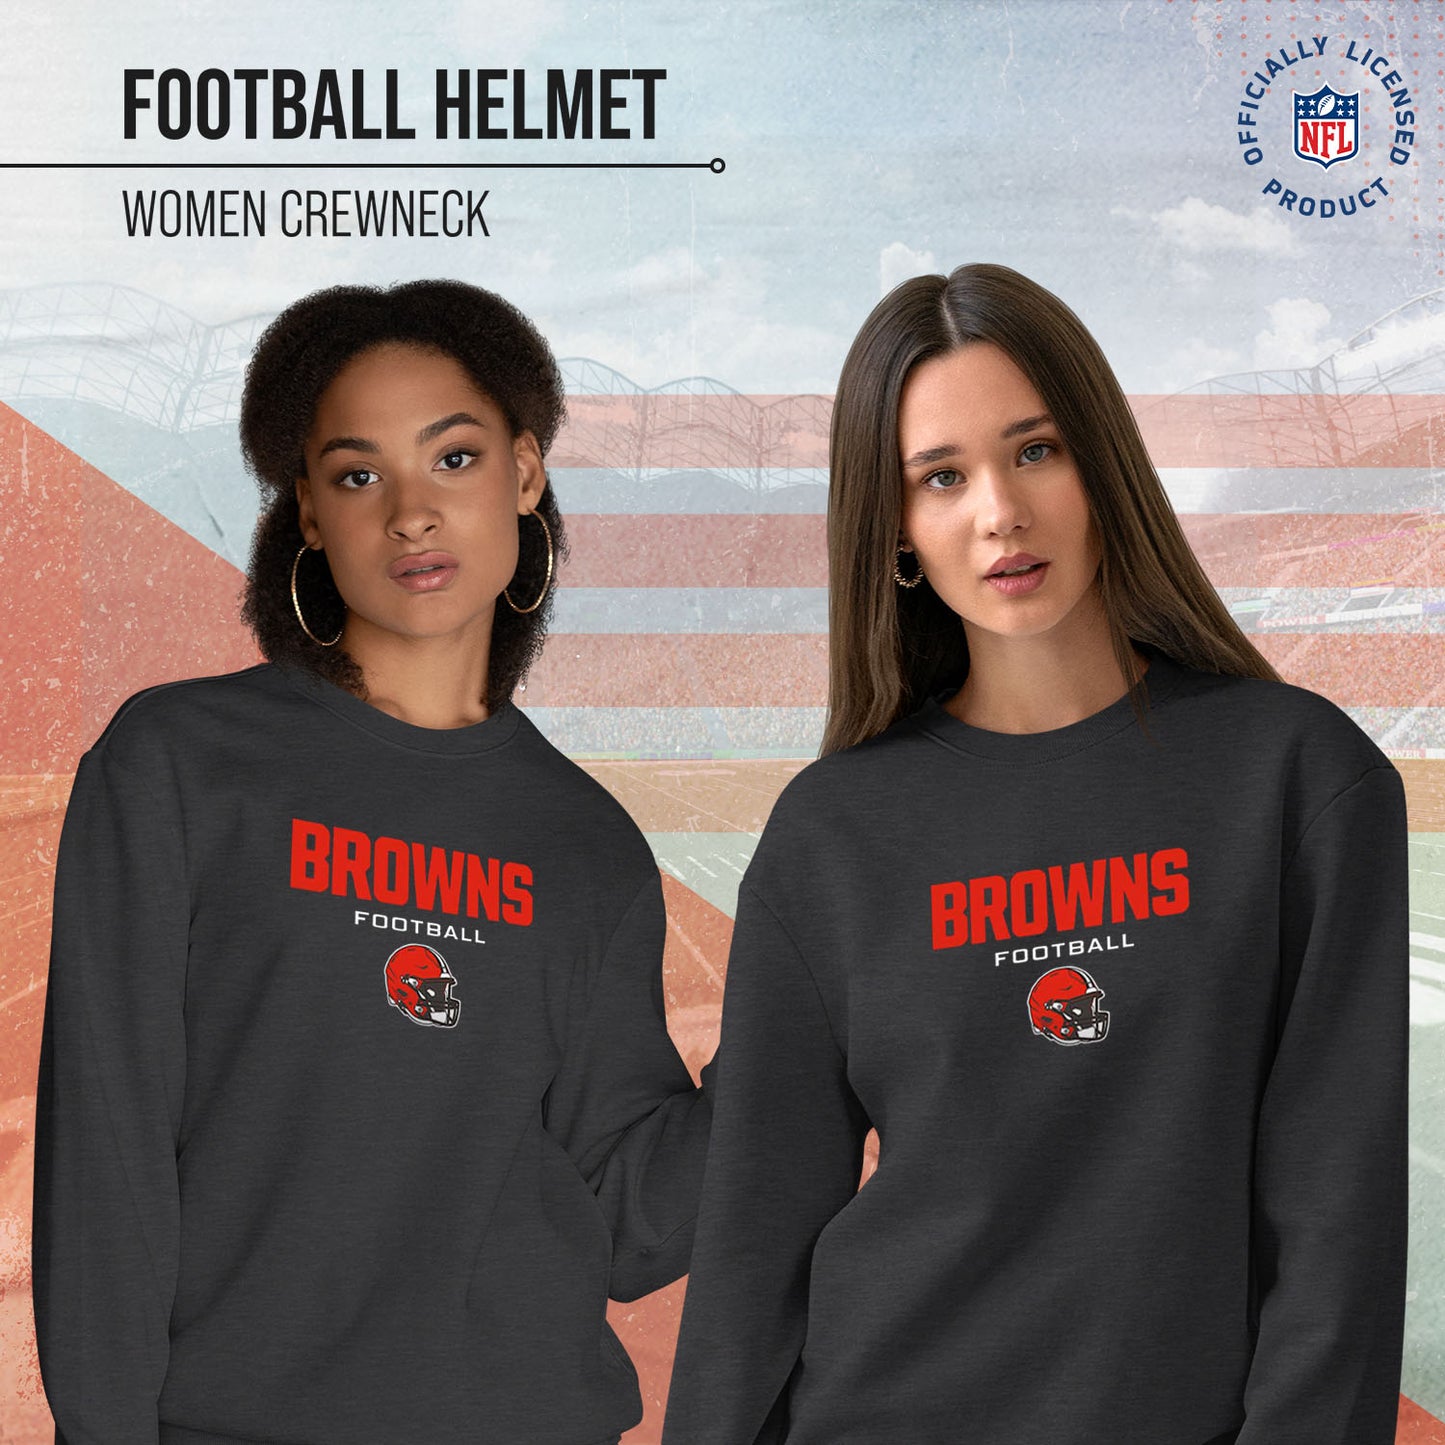 Cleveland Browns Women's NFL Football Helmet Charcoal Slouchy Crewneck -Tagless Lightweight Pullover - Charcoal